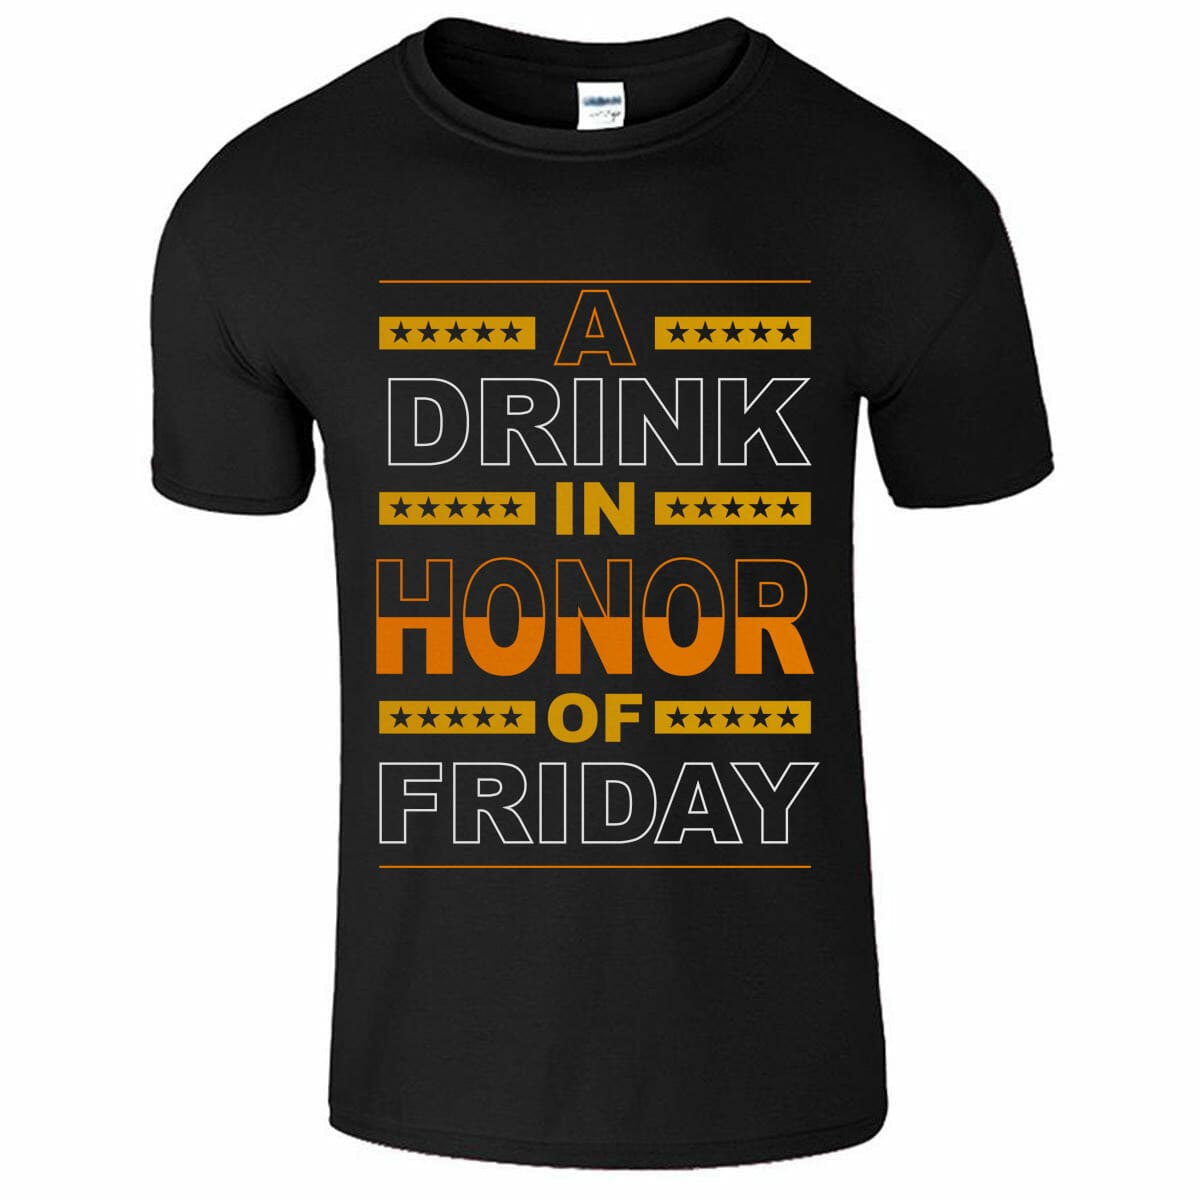 A Drink In Honor Of Friday - Funny T-Shirt Design